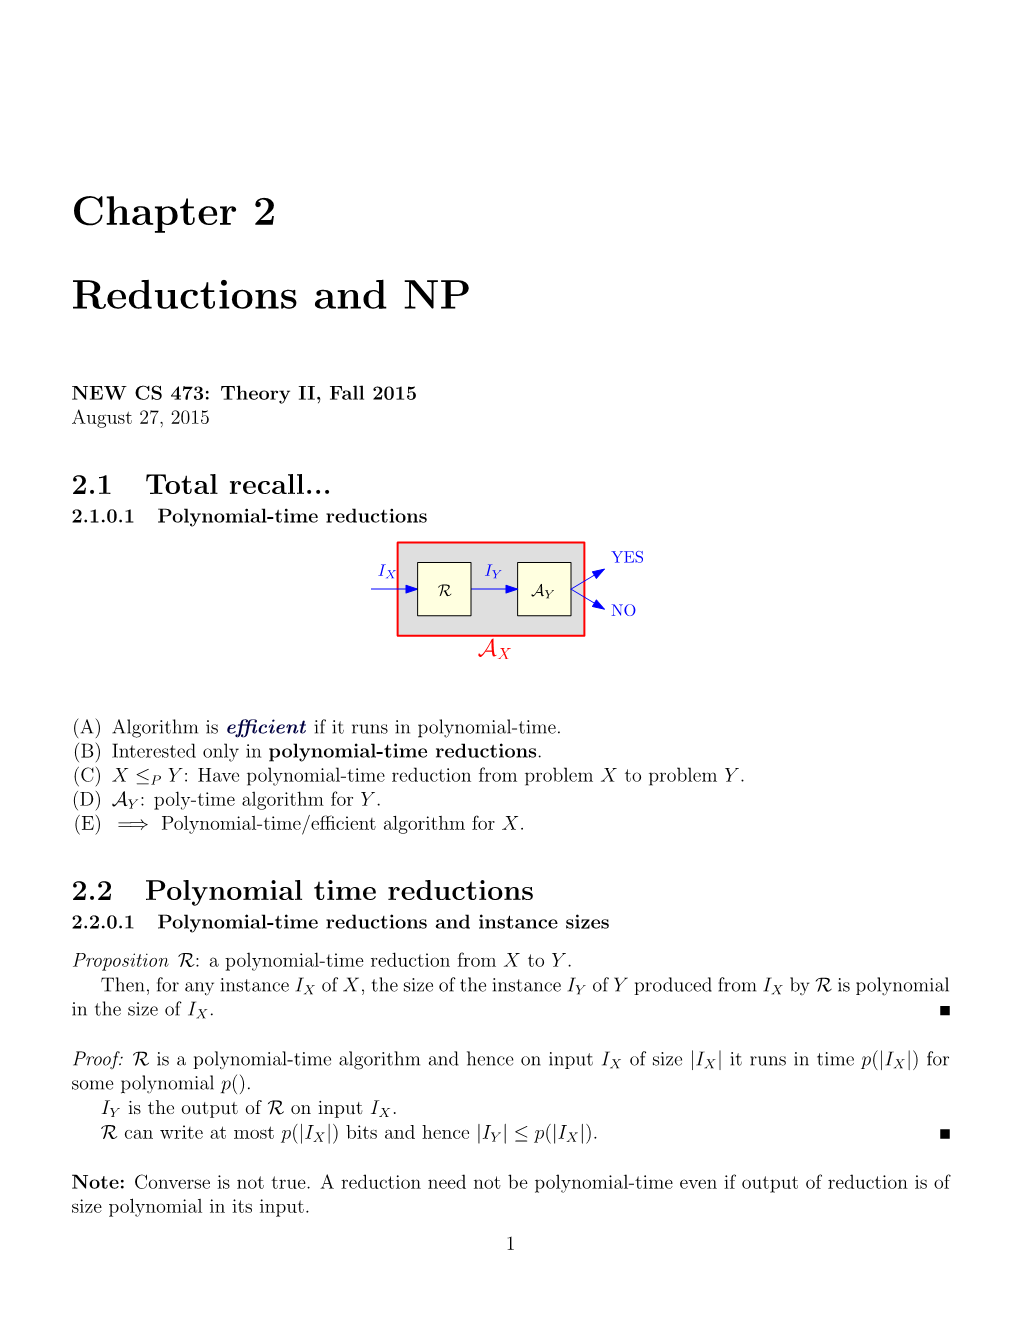 Chapter 2 Reductions and NP